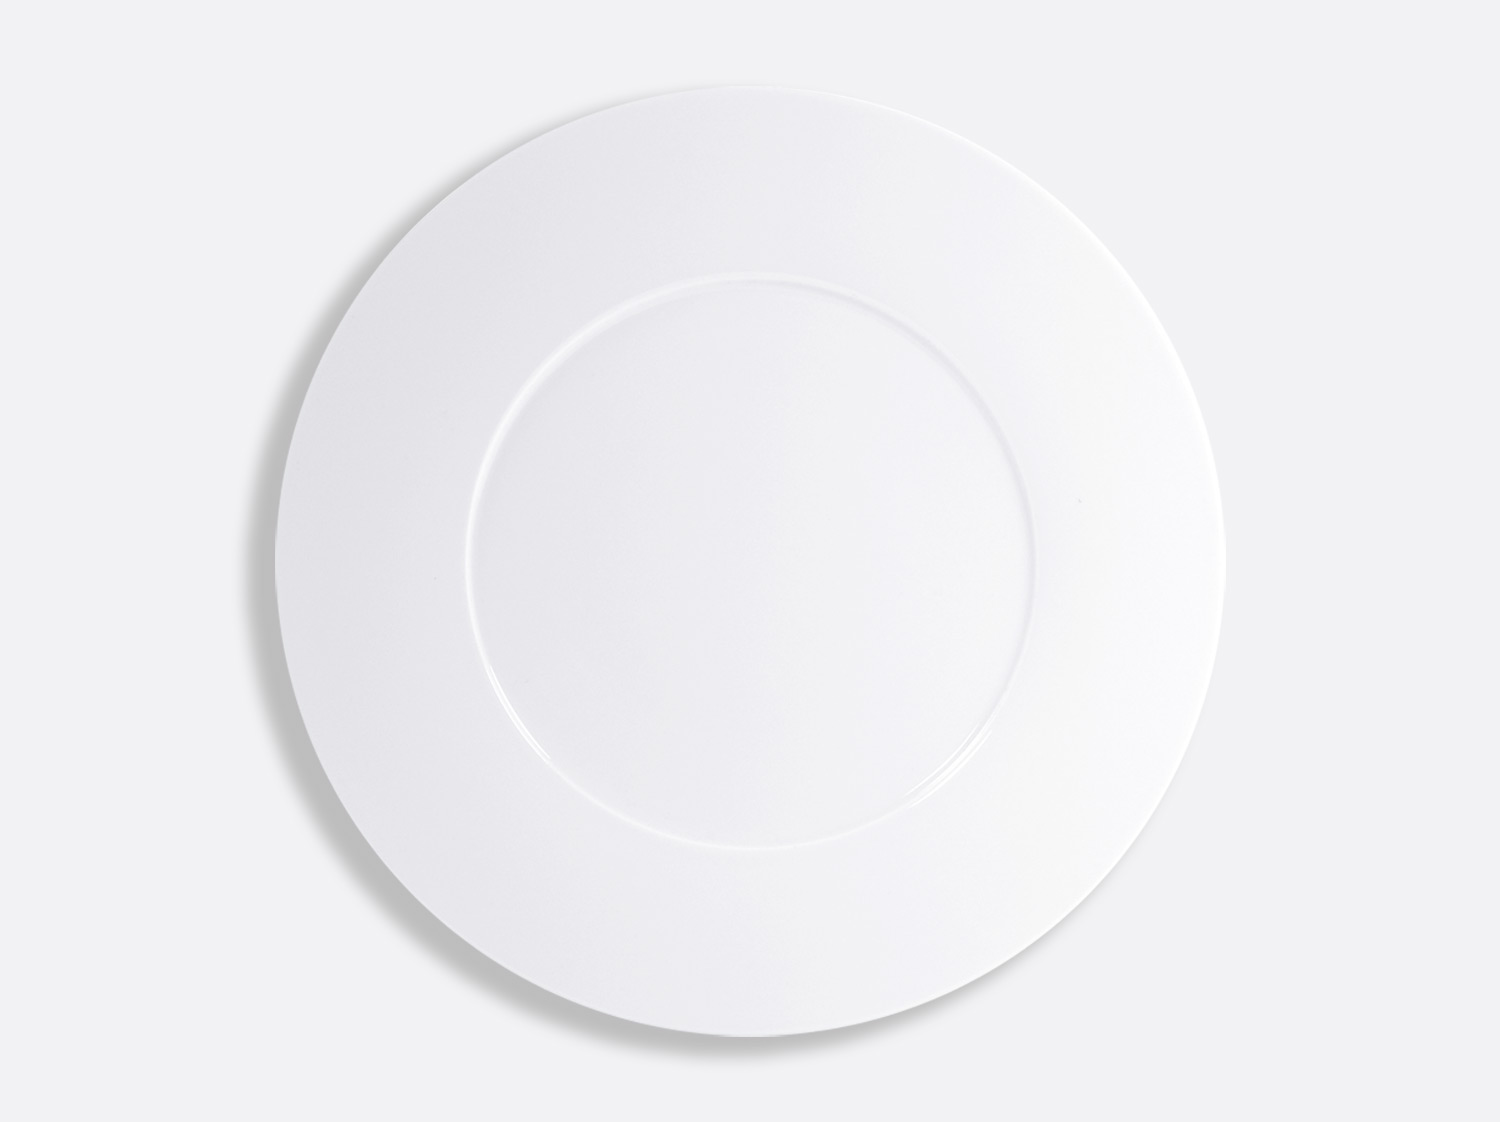 China Plate 12'' of the collection Astre blanc | Bernardaud